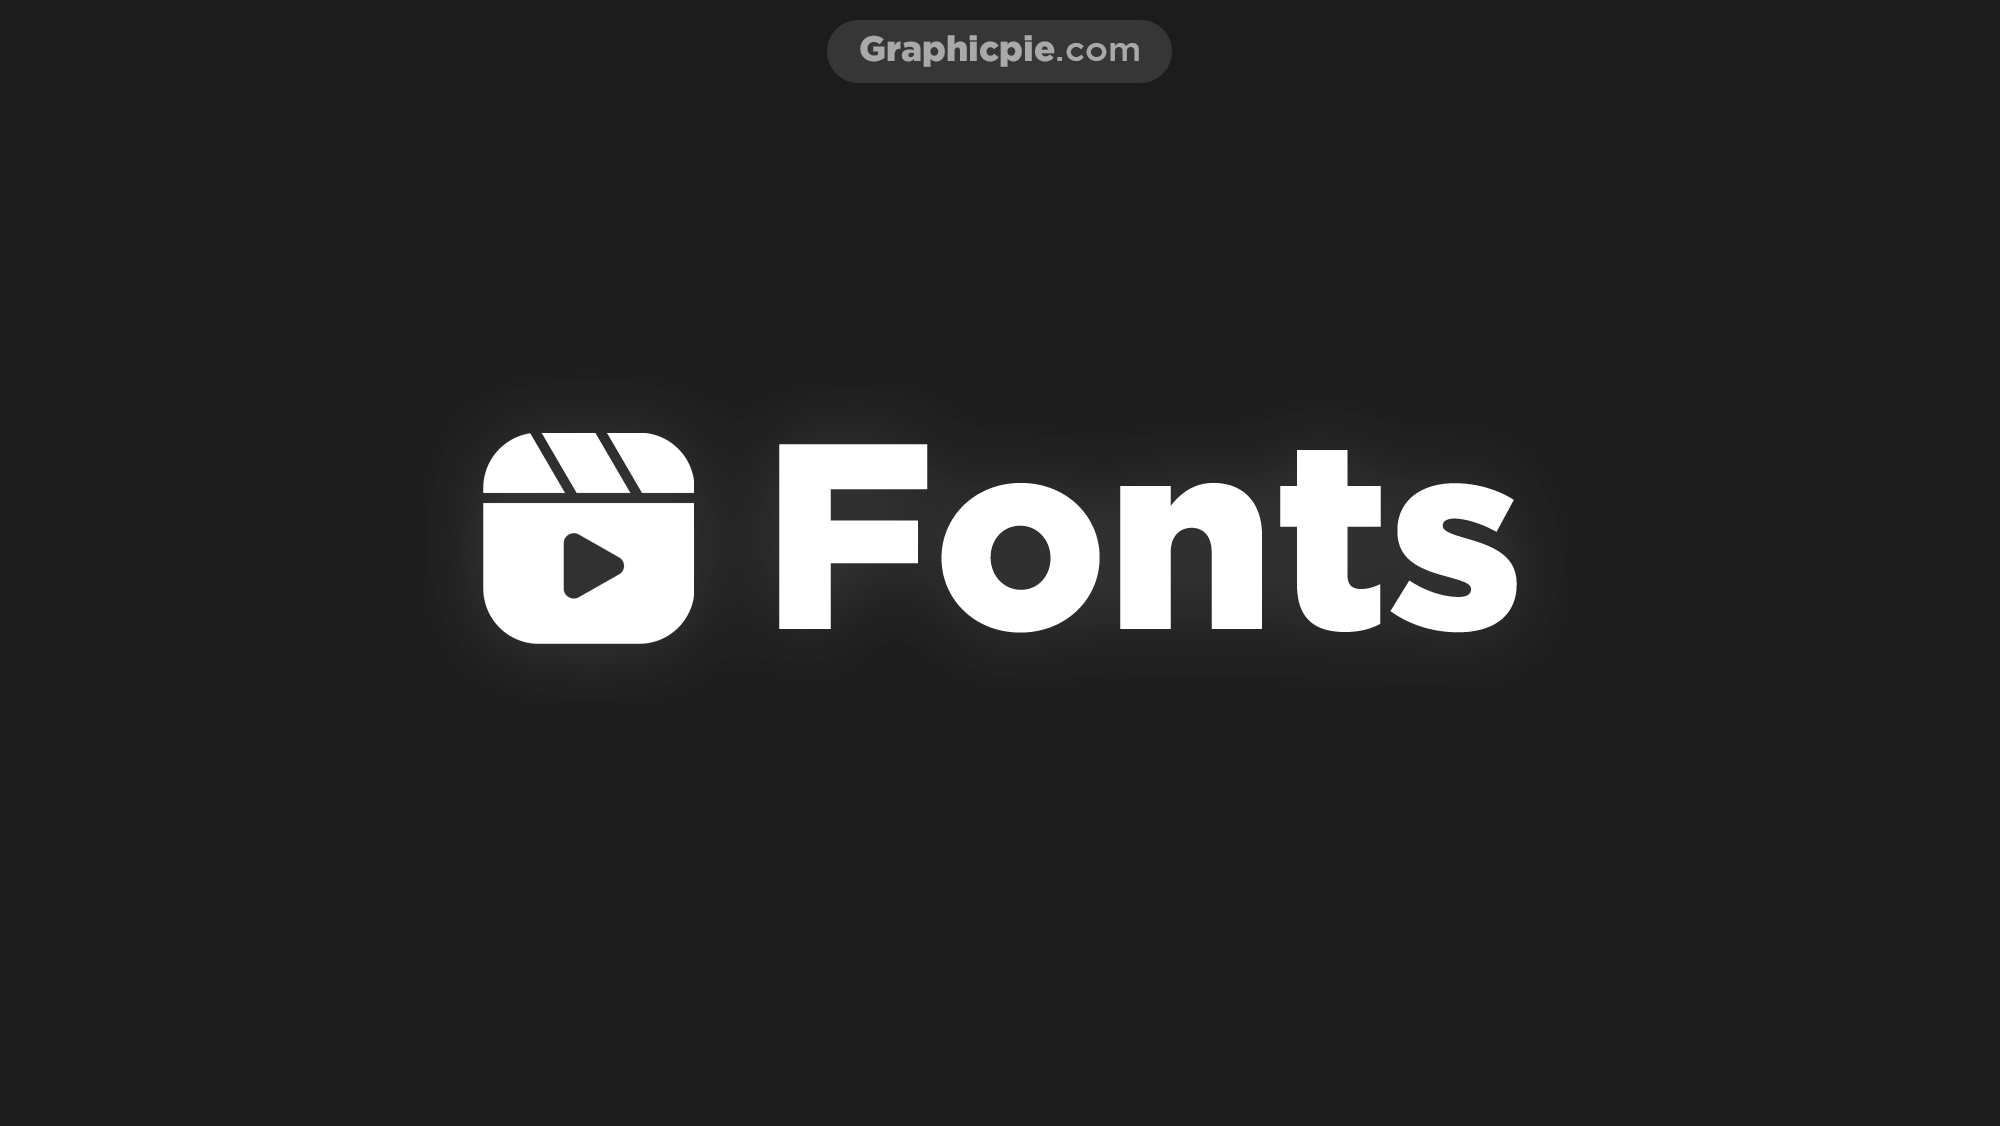 fonts for instagram free